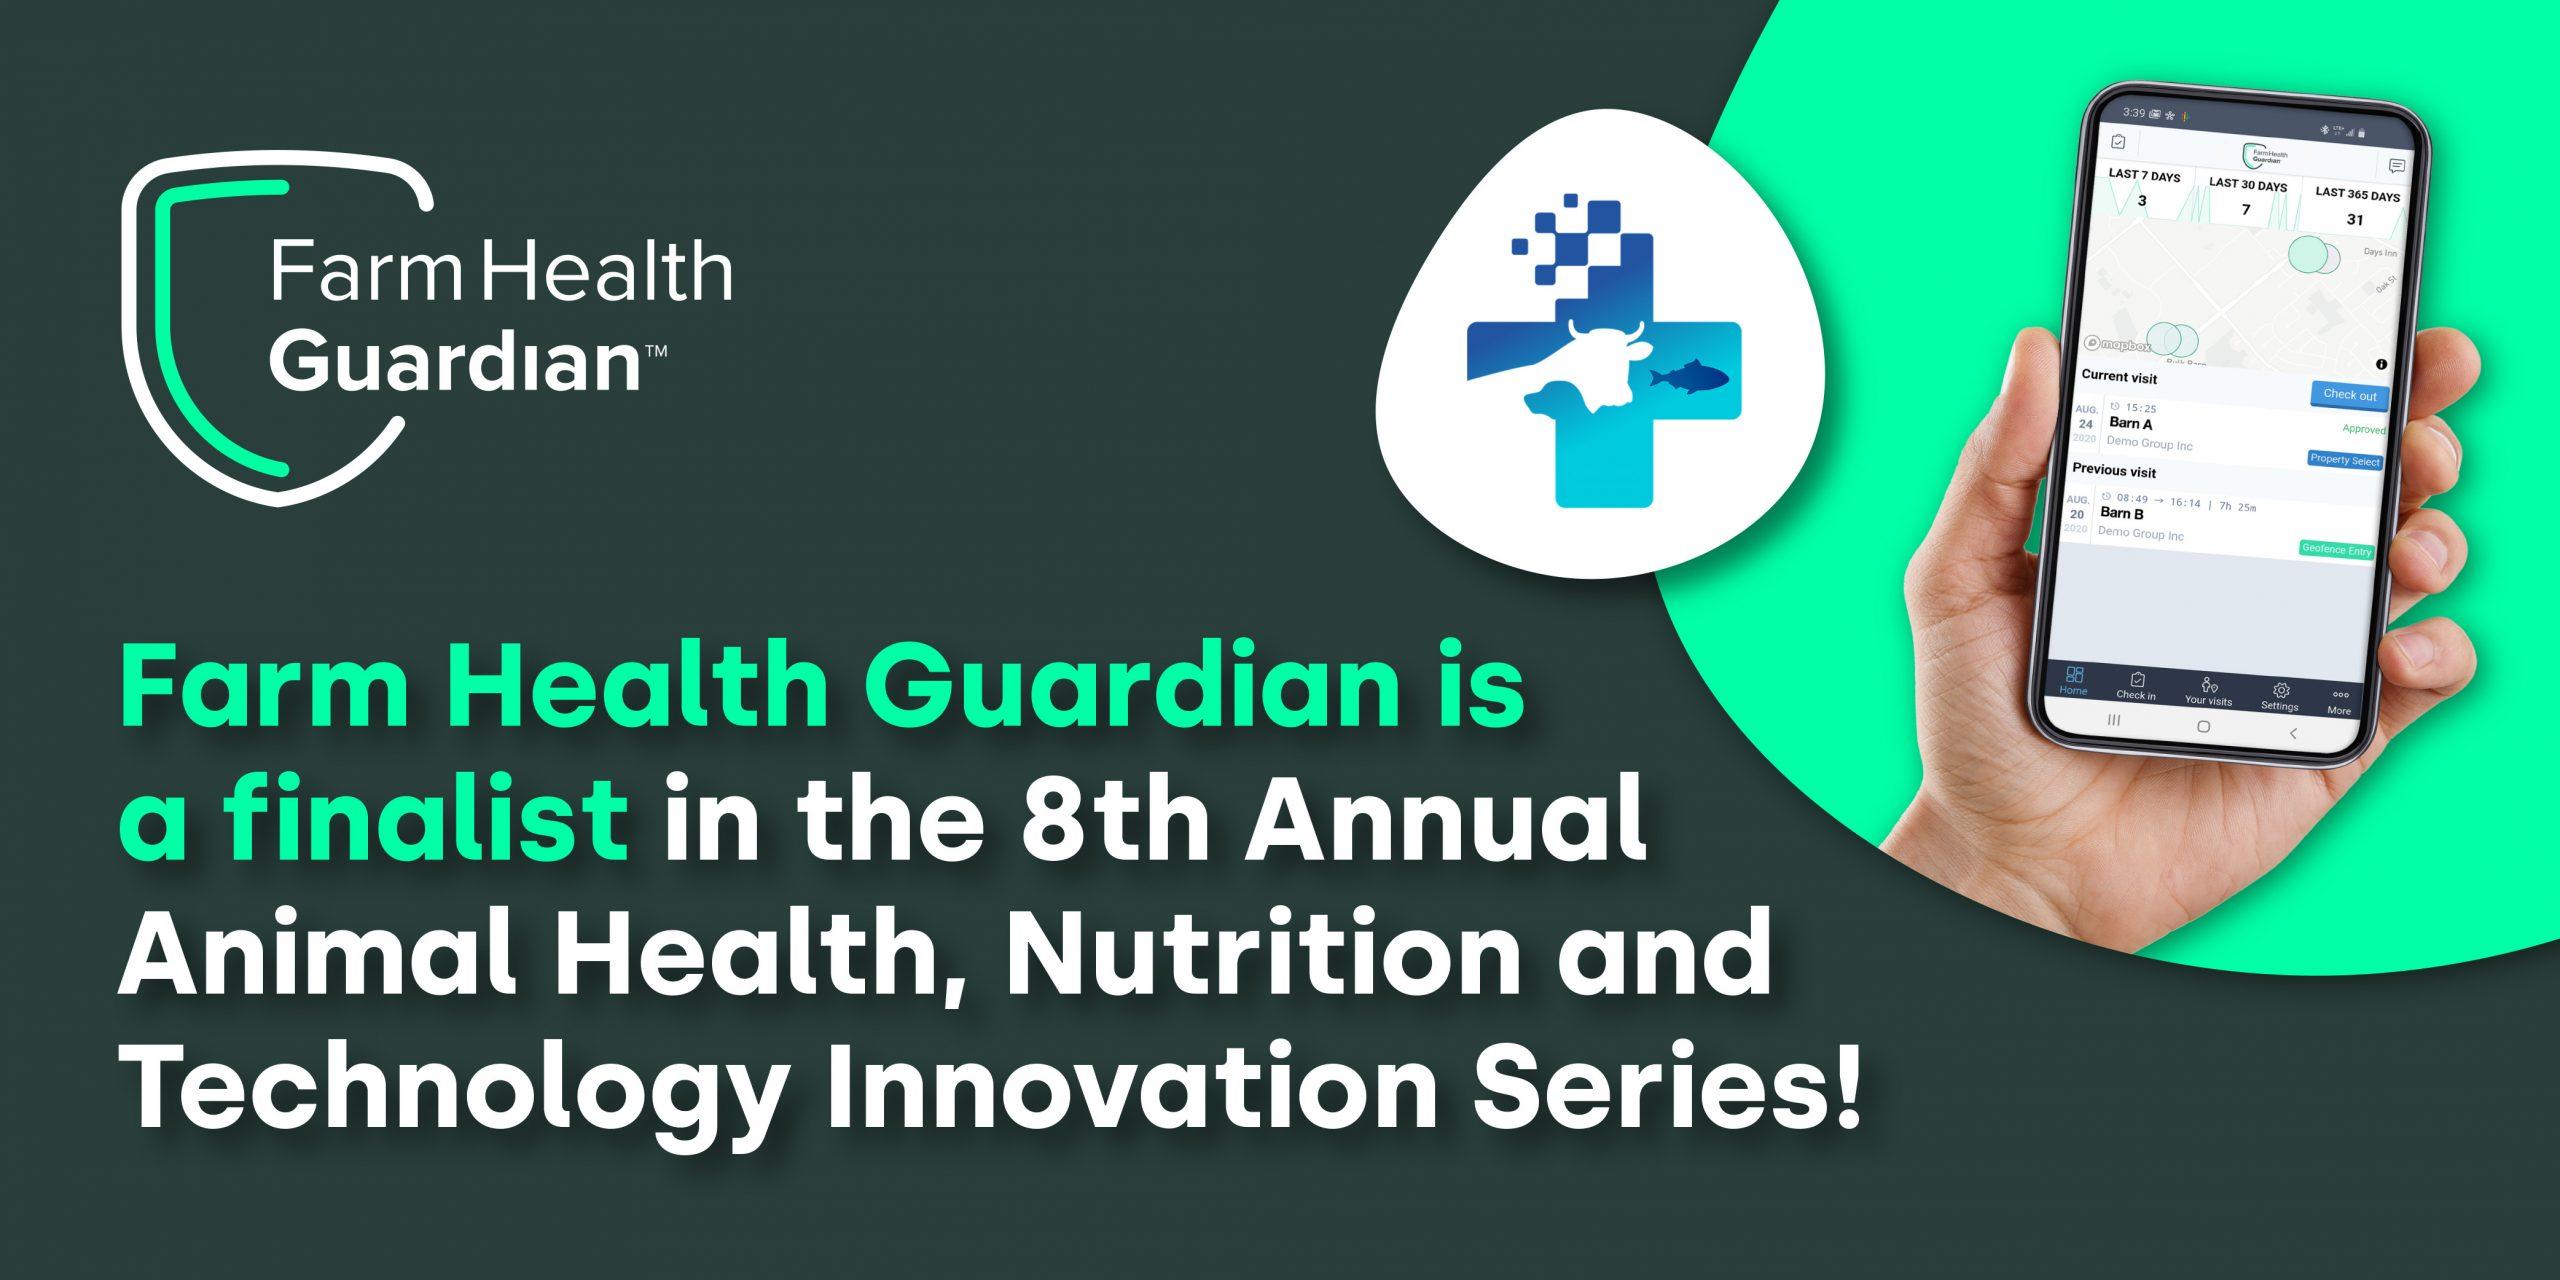 Farm Health Guardian is a finalist at the 8th Annual Animal Health, Nutrition and Technology Innovation series!